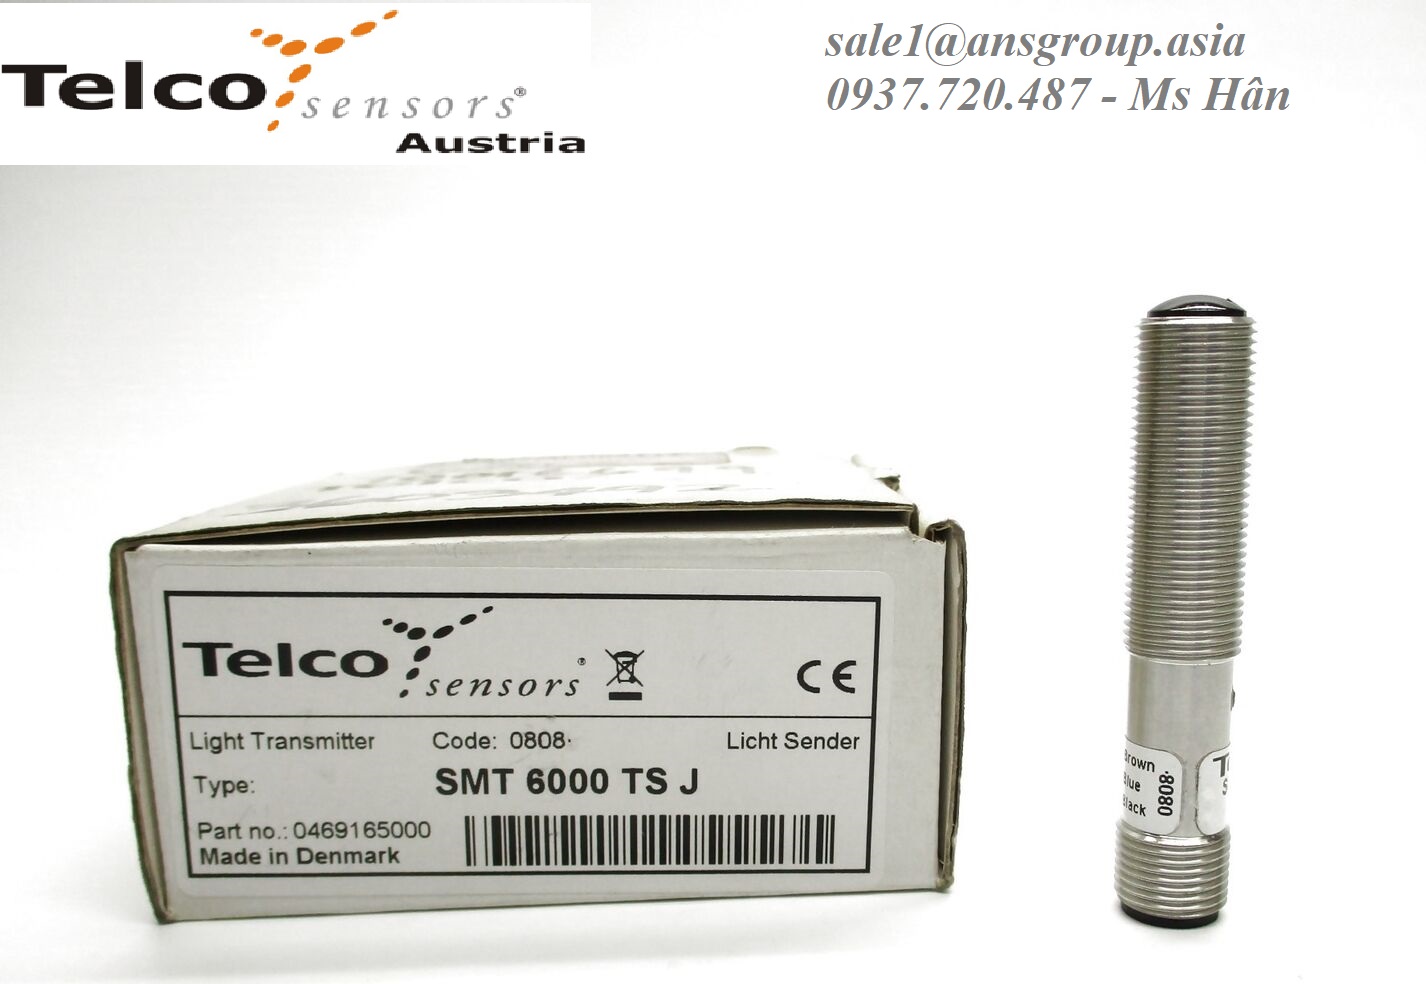 may-phat-tuong-thich-compatible-transmitter-smt-6001-ts-j-telco-sensor-vietnam.png